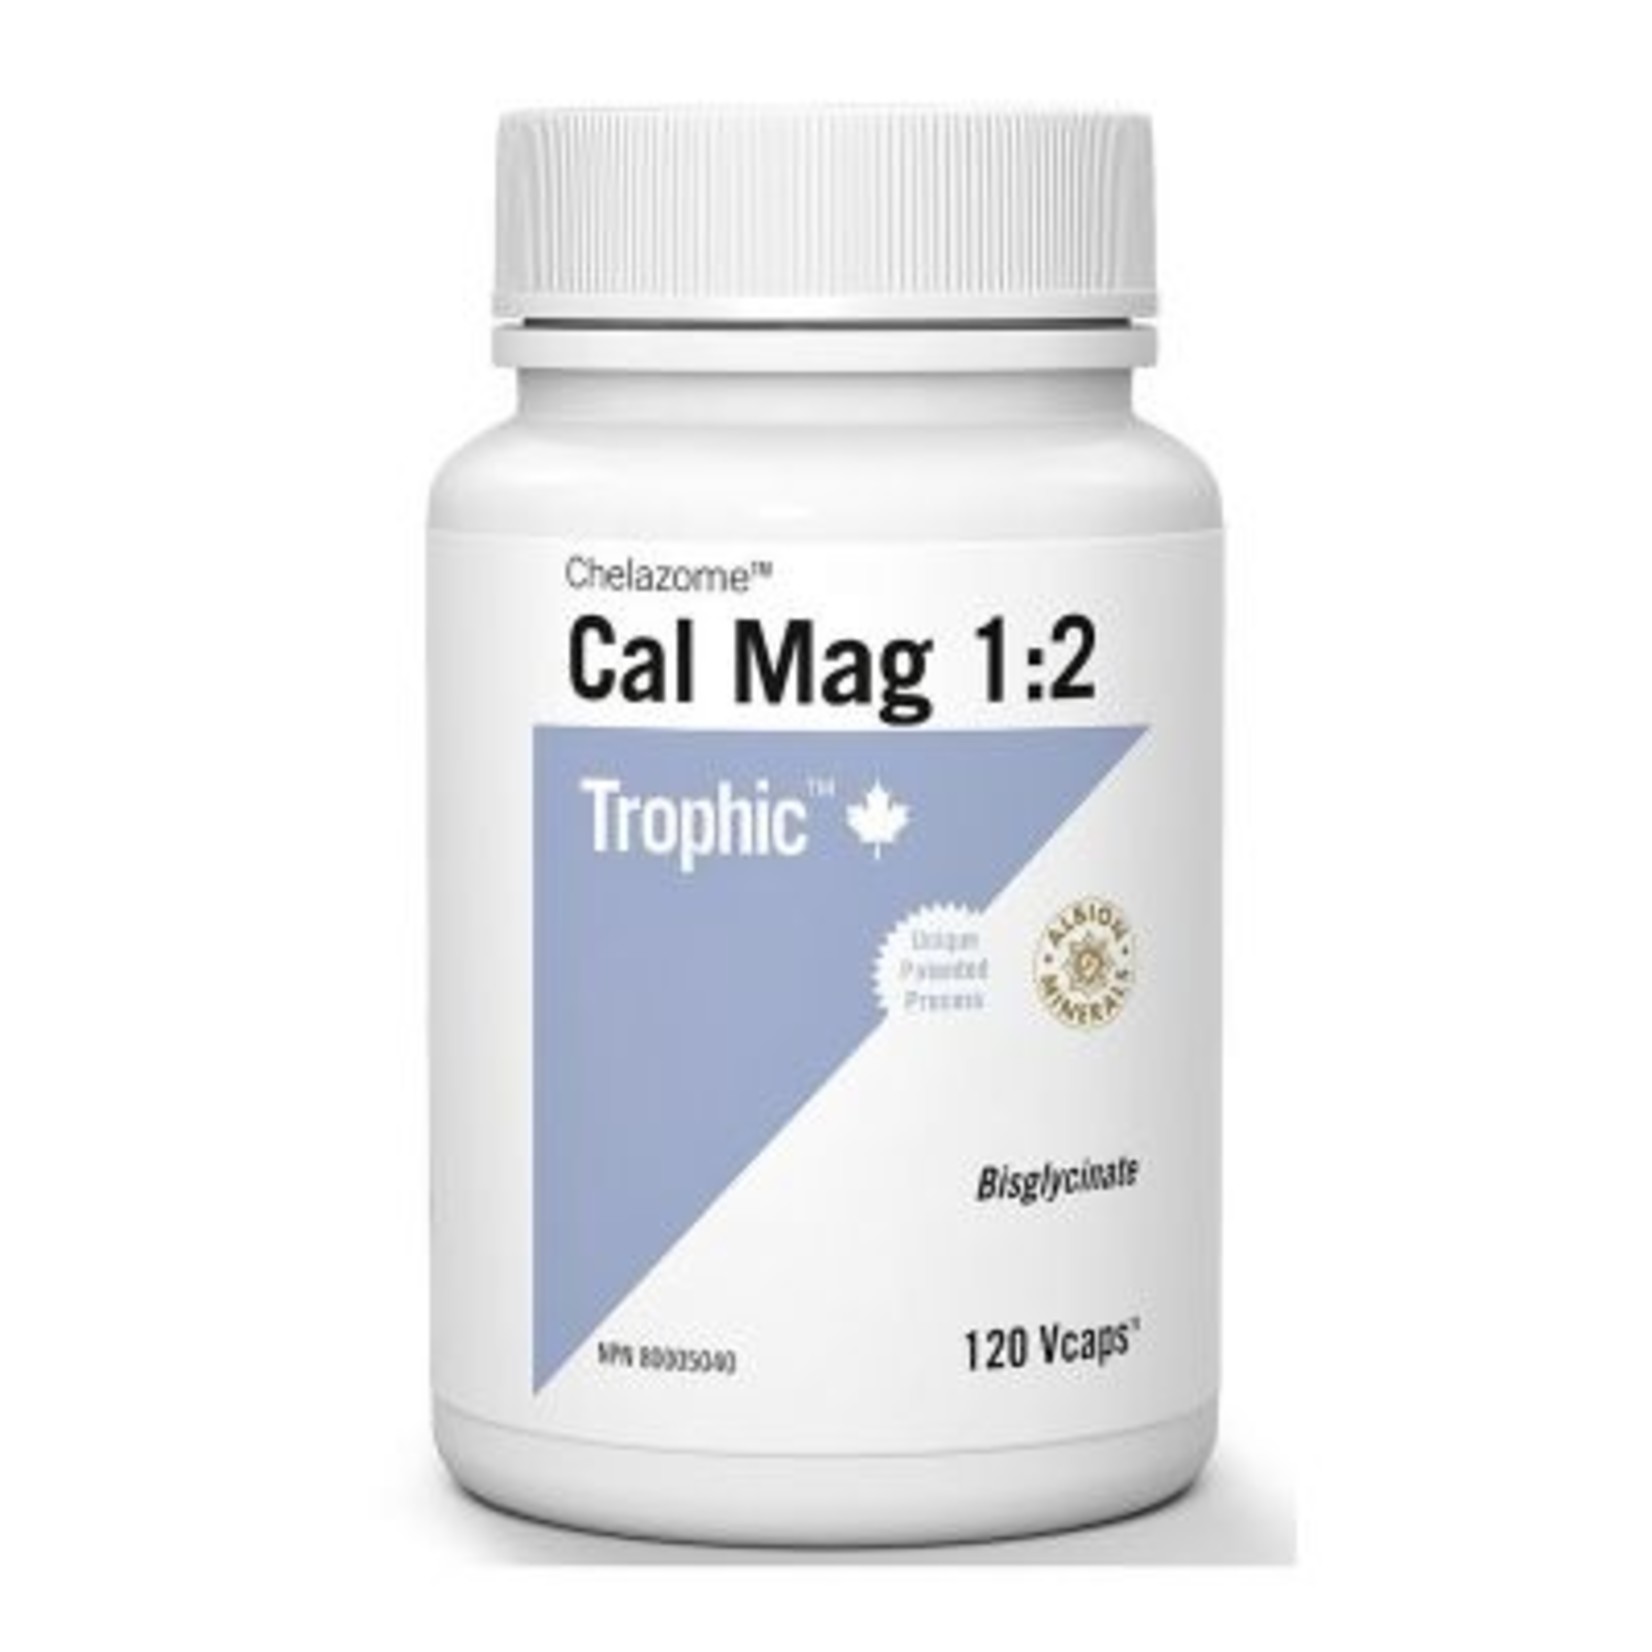 TROPHIC TROPHIC CAL MAG 1:2 CHELAZOME 120 VCAPS